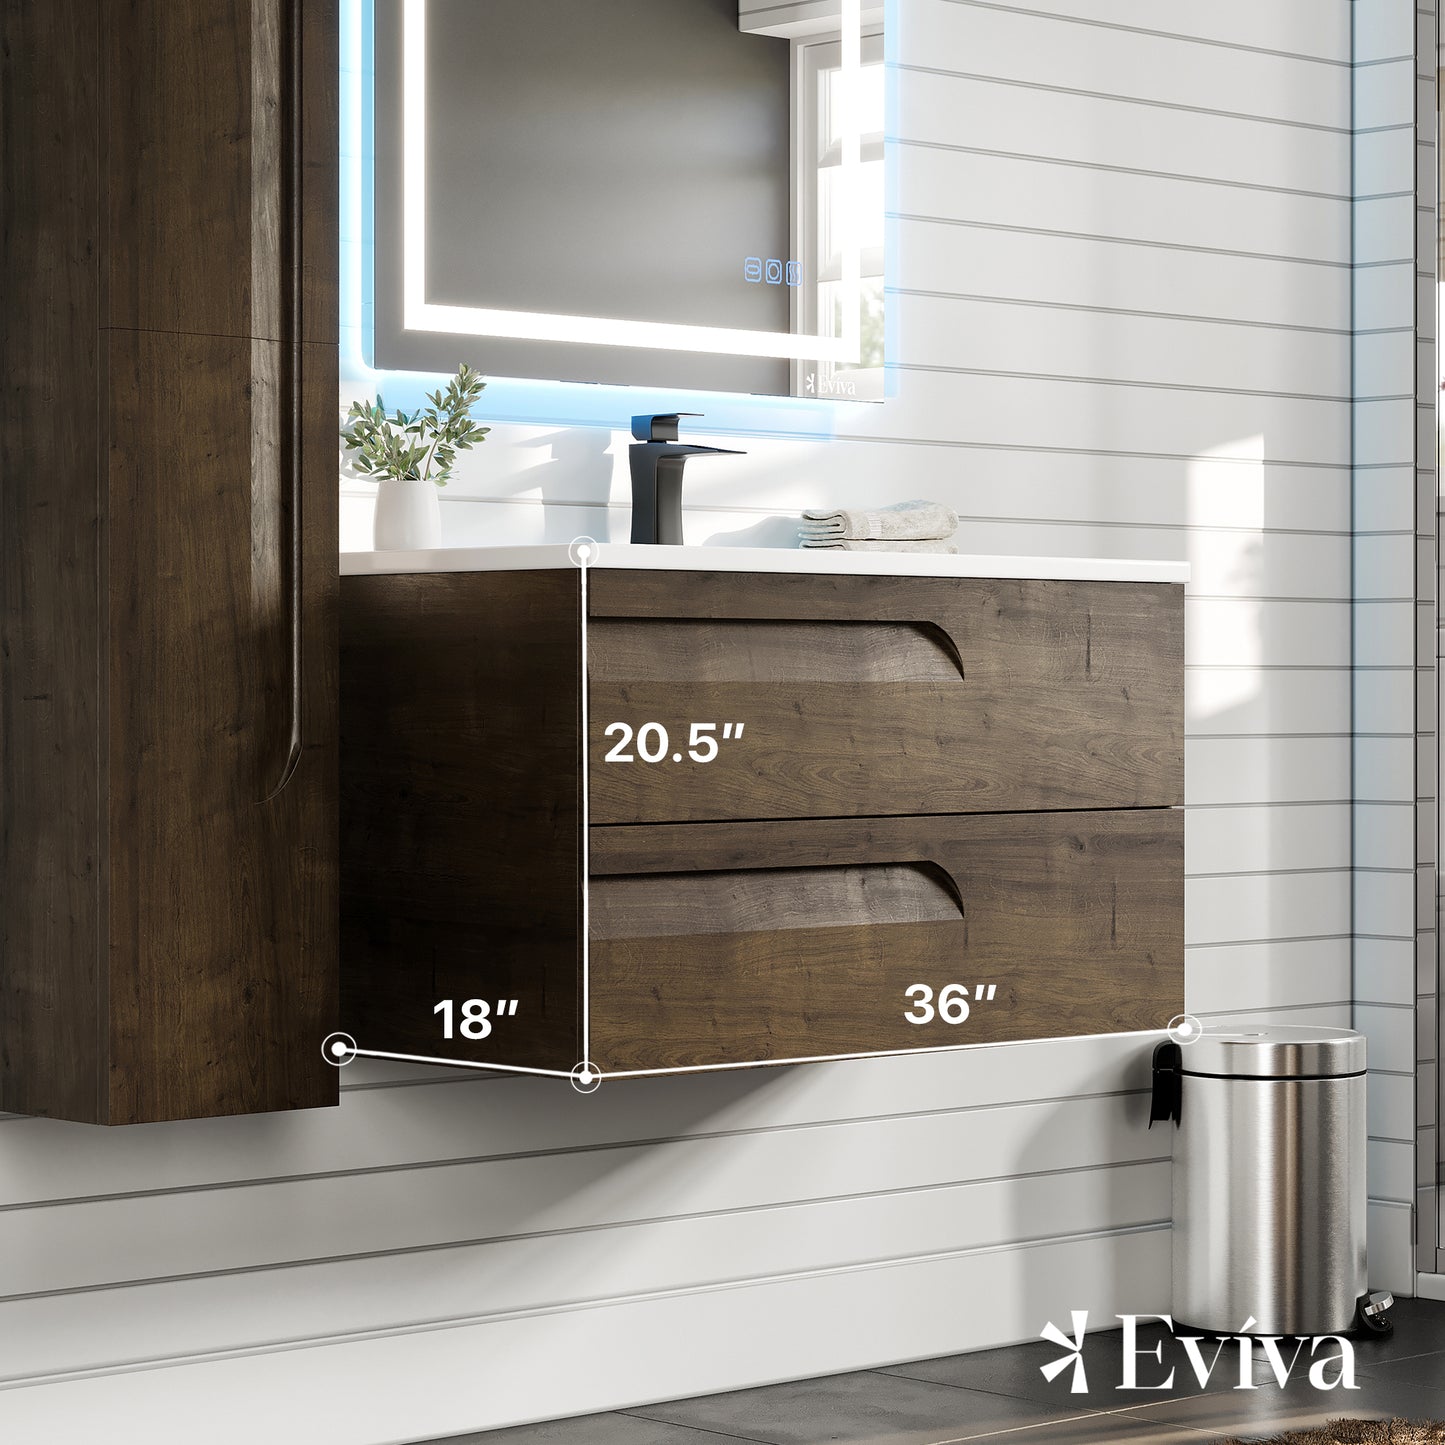 Joy 36"W x 18"D Rosewood Bathroom Vanity with Porcelain Countertop and Integrated Sink